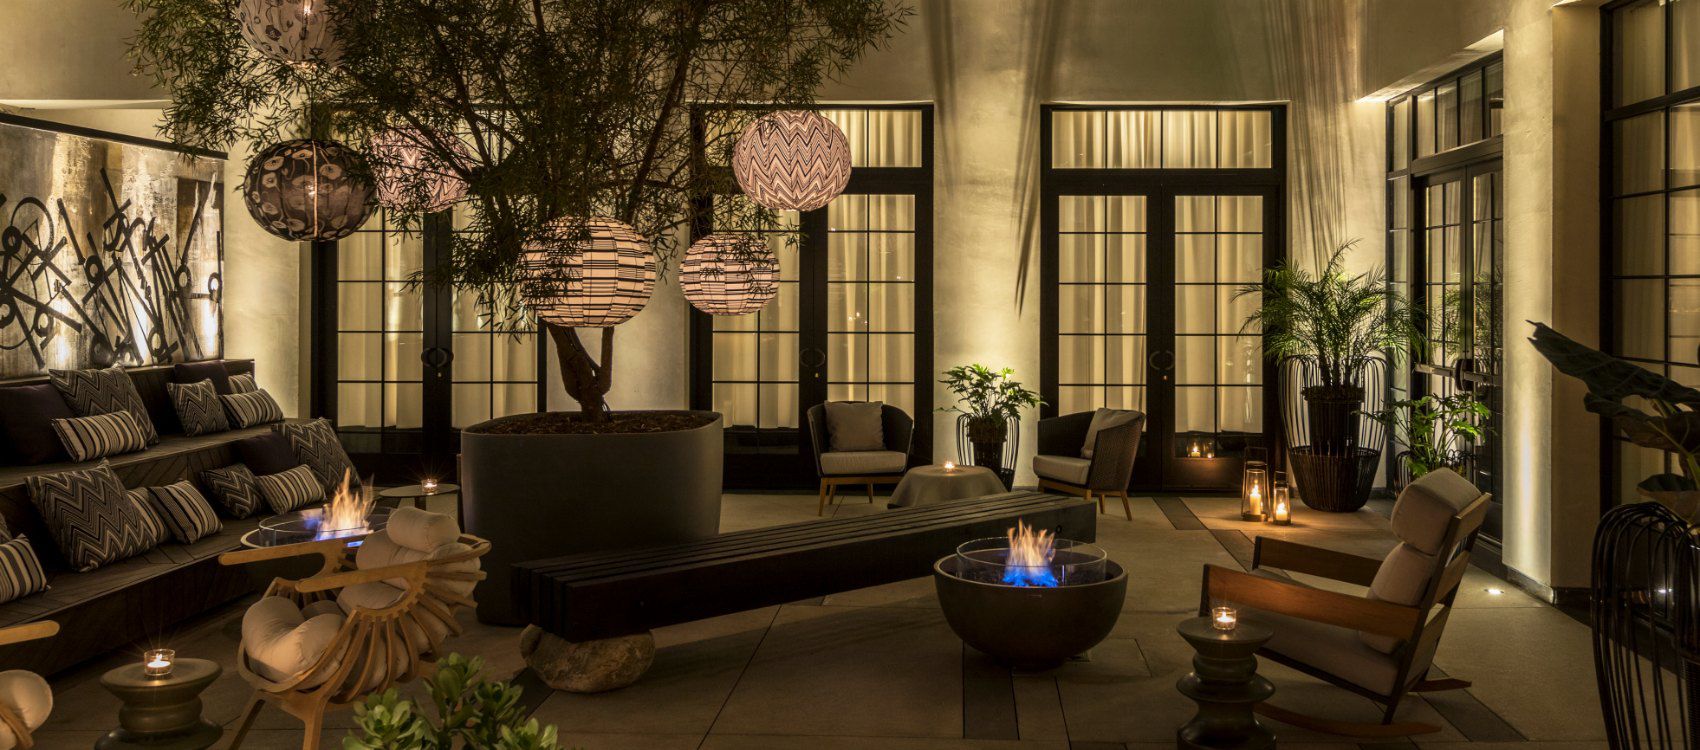 Upscale hotel lobby with fire pit